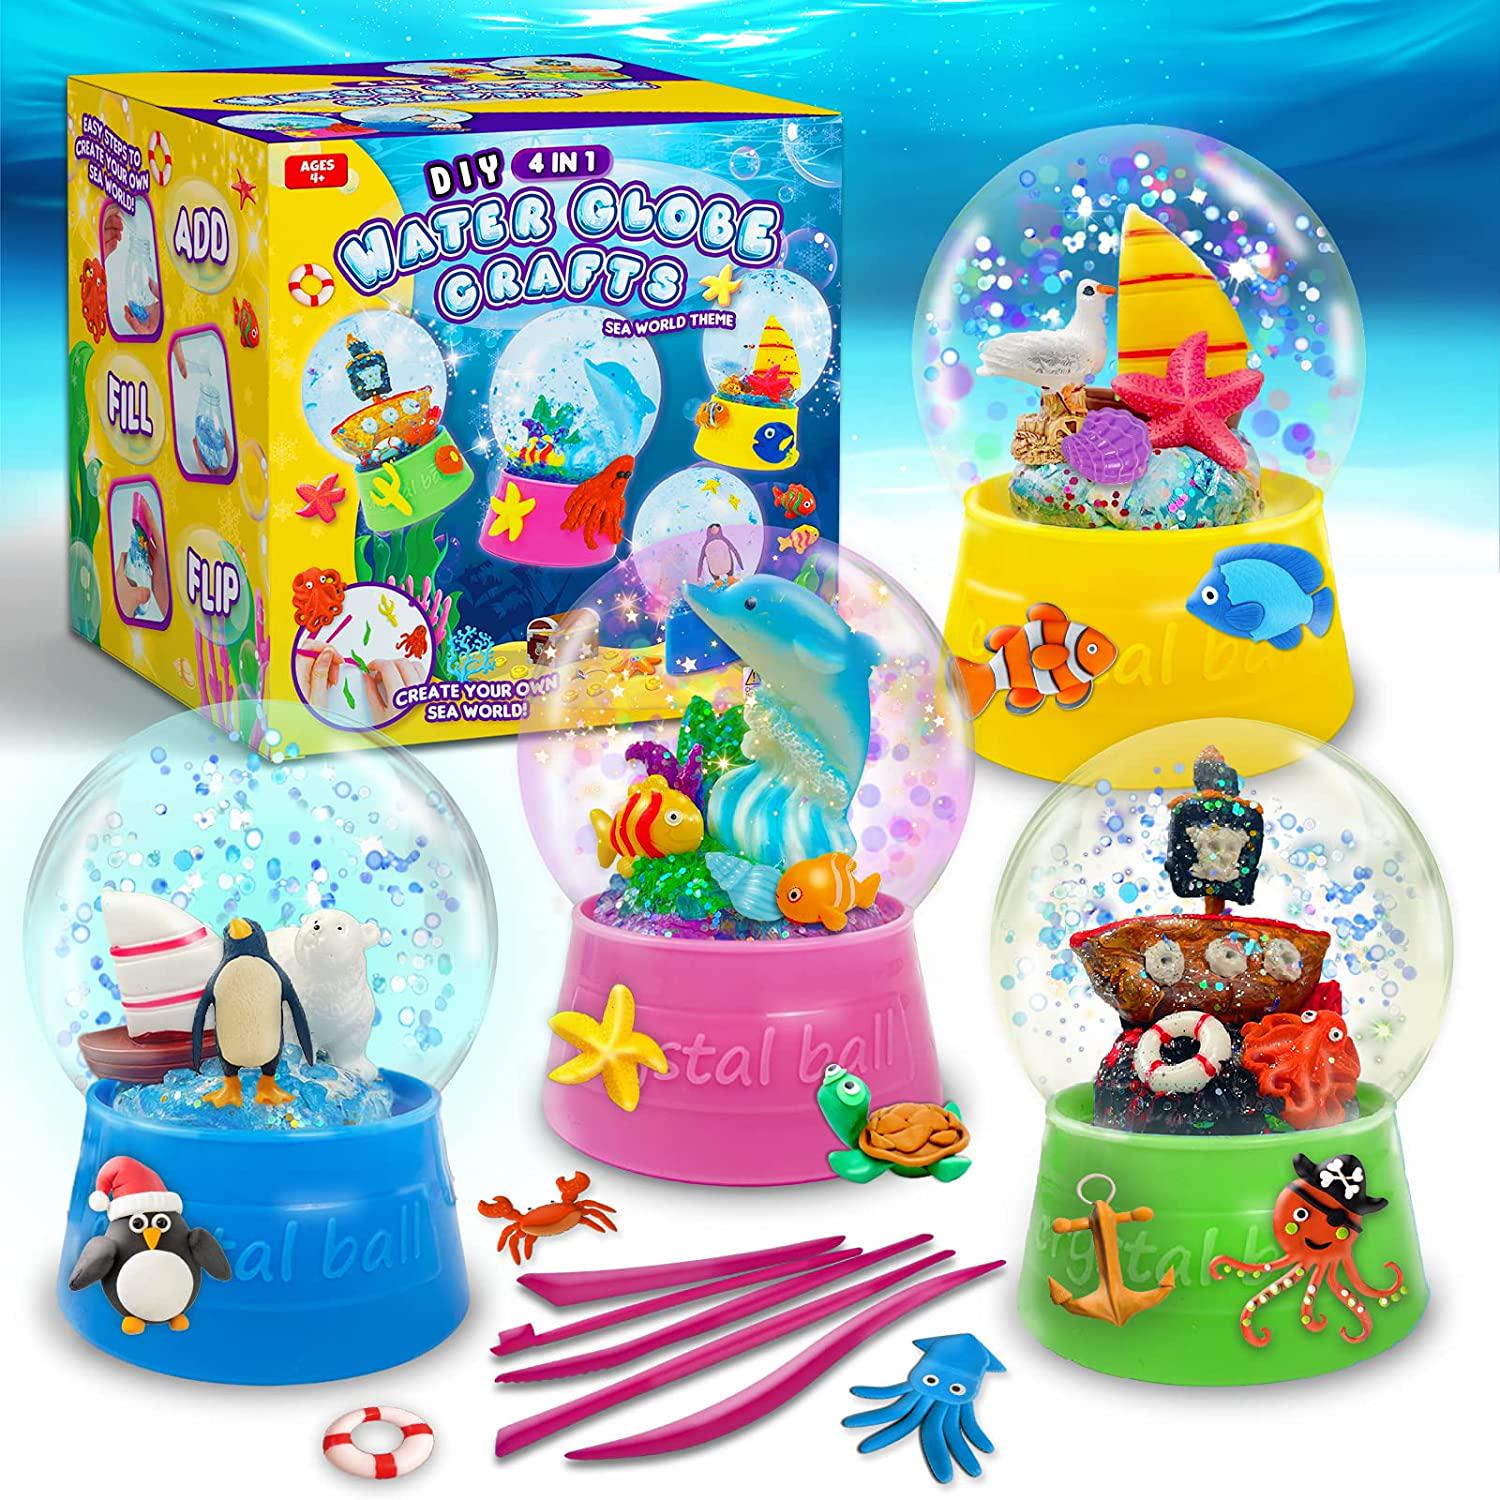 Goody King, Goodyking Make Your Own Water Globe - Snow Water Stem Projects Diy Activities Glitters Supplies Perfect Arts And Crafts Clay For Girls Boys Kids Ages 4-6 4-8 6-8 8-12 + Years Old Materials Stuff Games